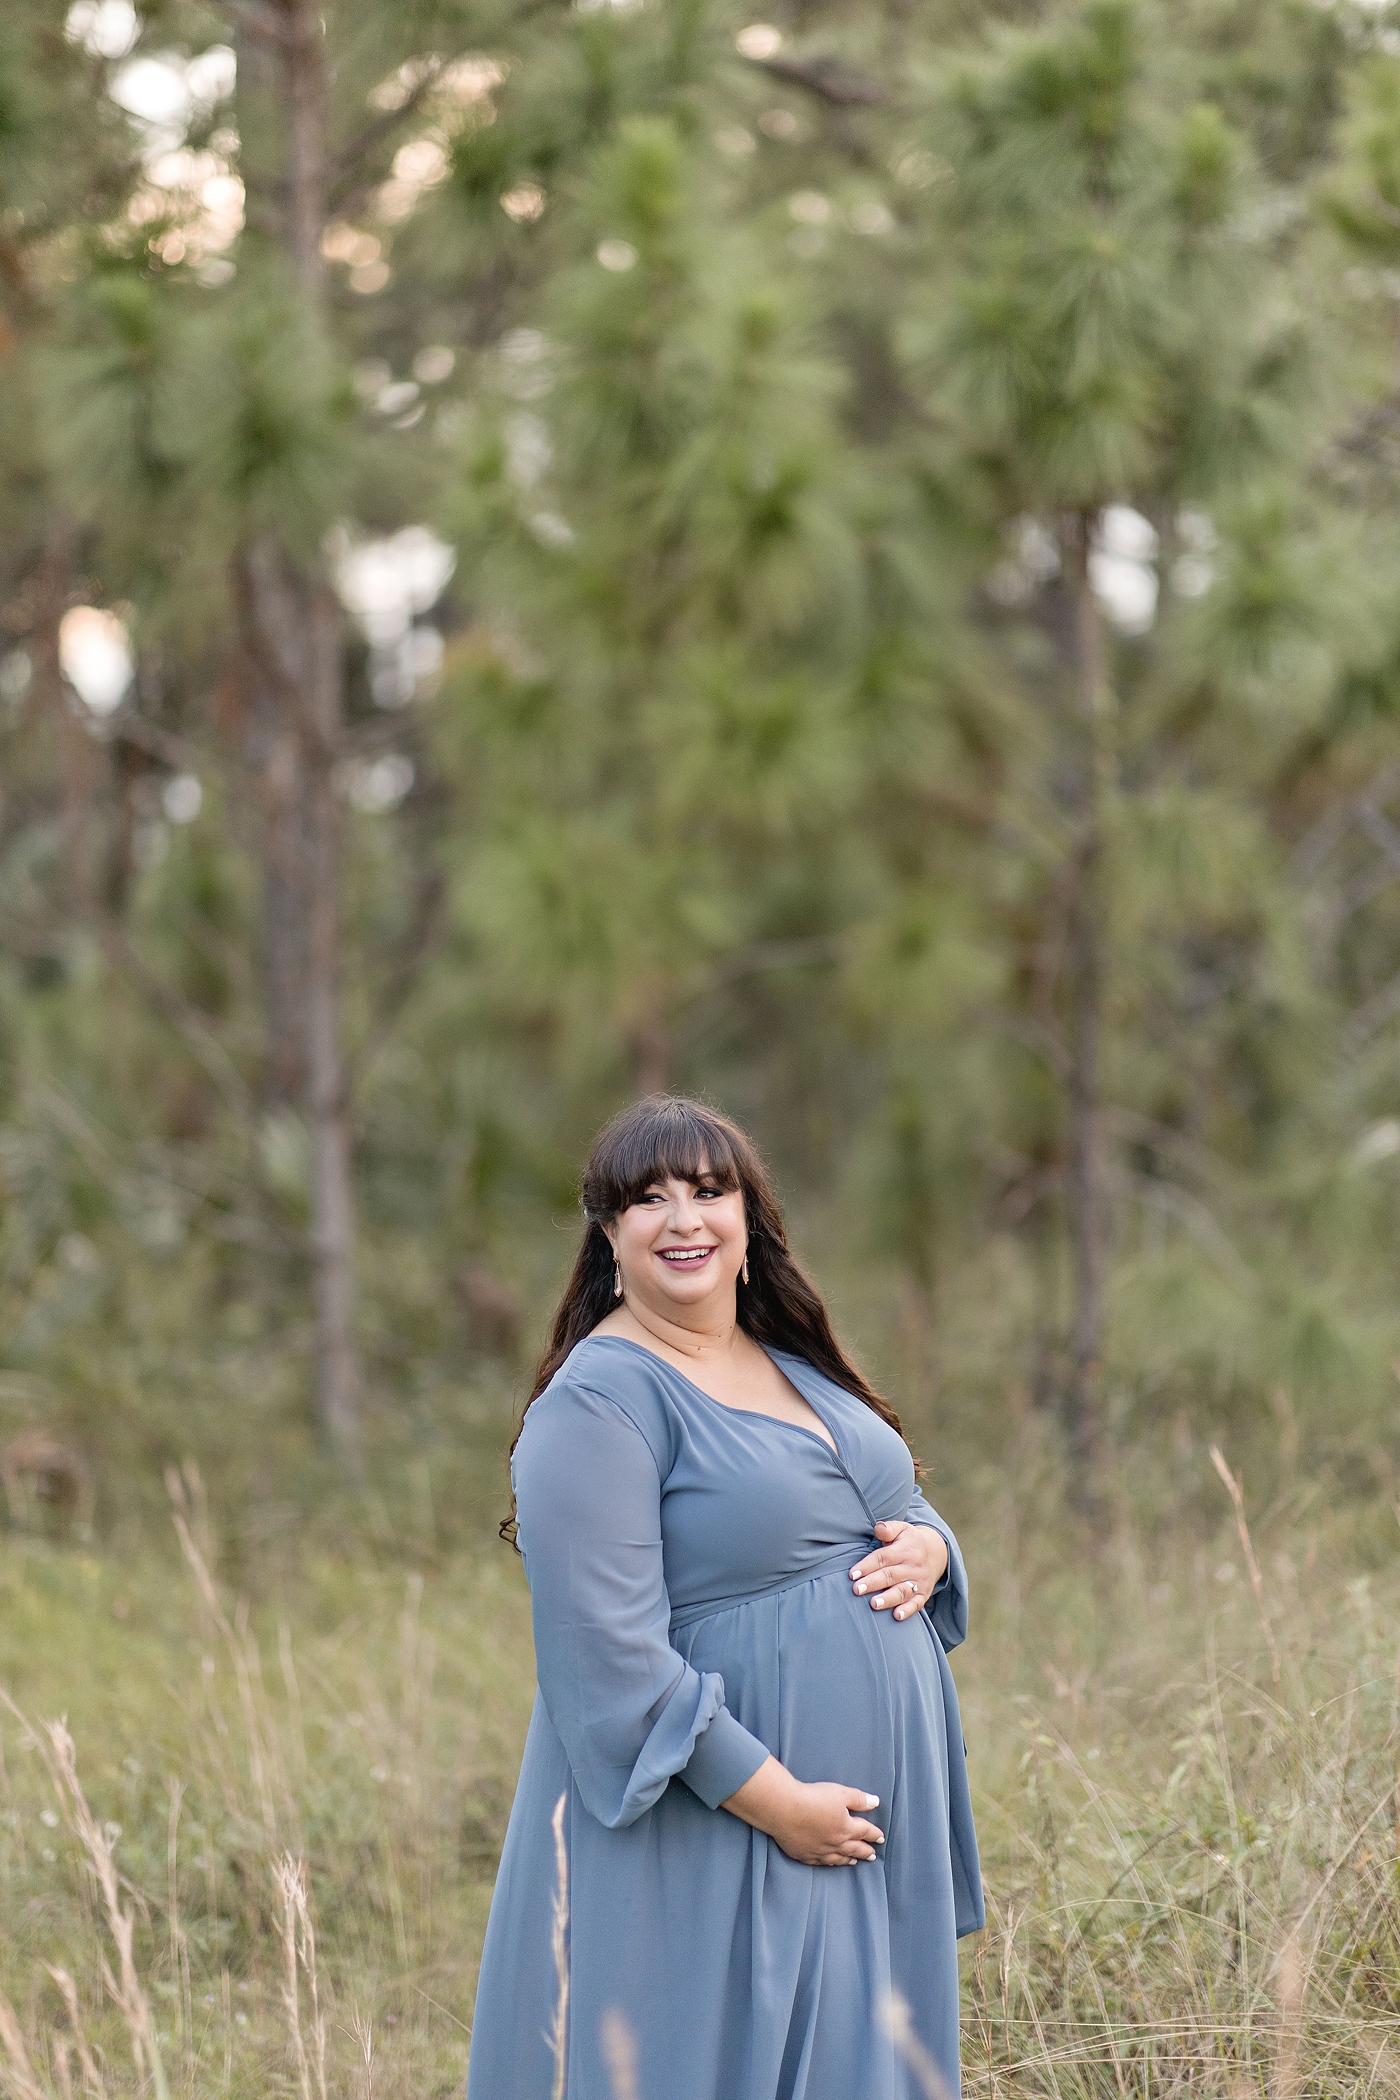 Plus Size Maternity Photoshoot with Mom smiles in blue dress during mother nature inspired maternity session. Photo by South Florida Maternity Photographer Ivanna Vidal Photography.